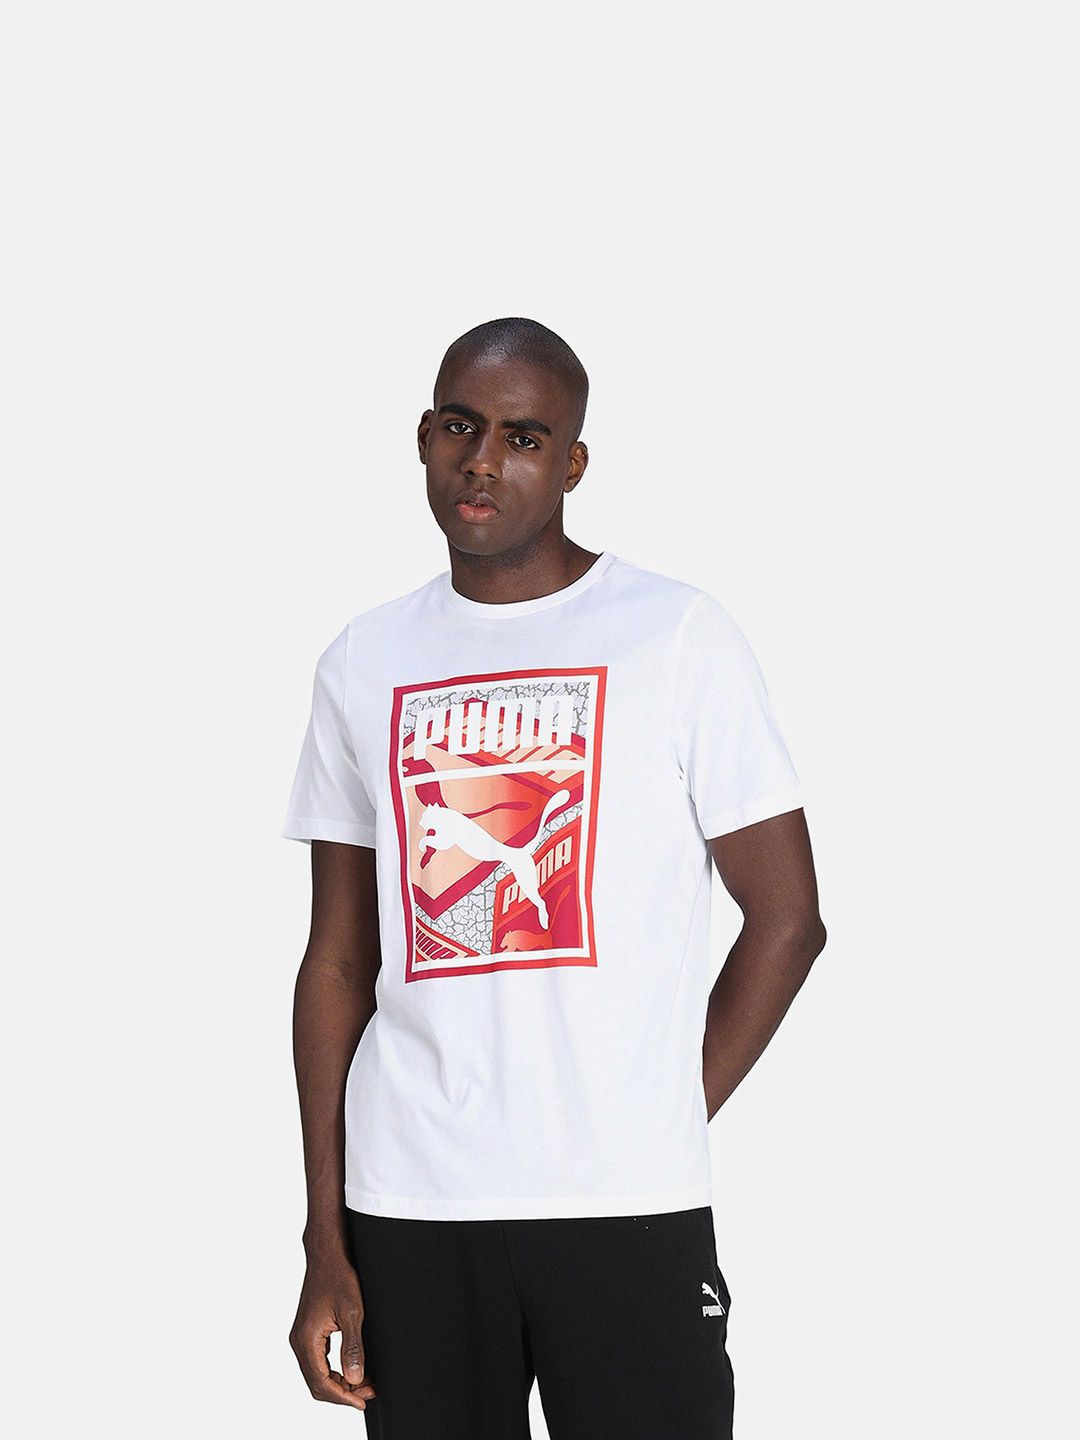 Buy Men White & Red Printed Graphic Box Logo Play T-Shirts From Fancode ...